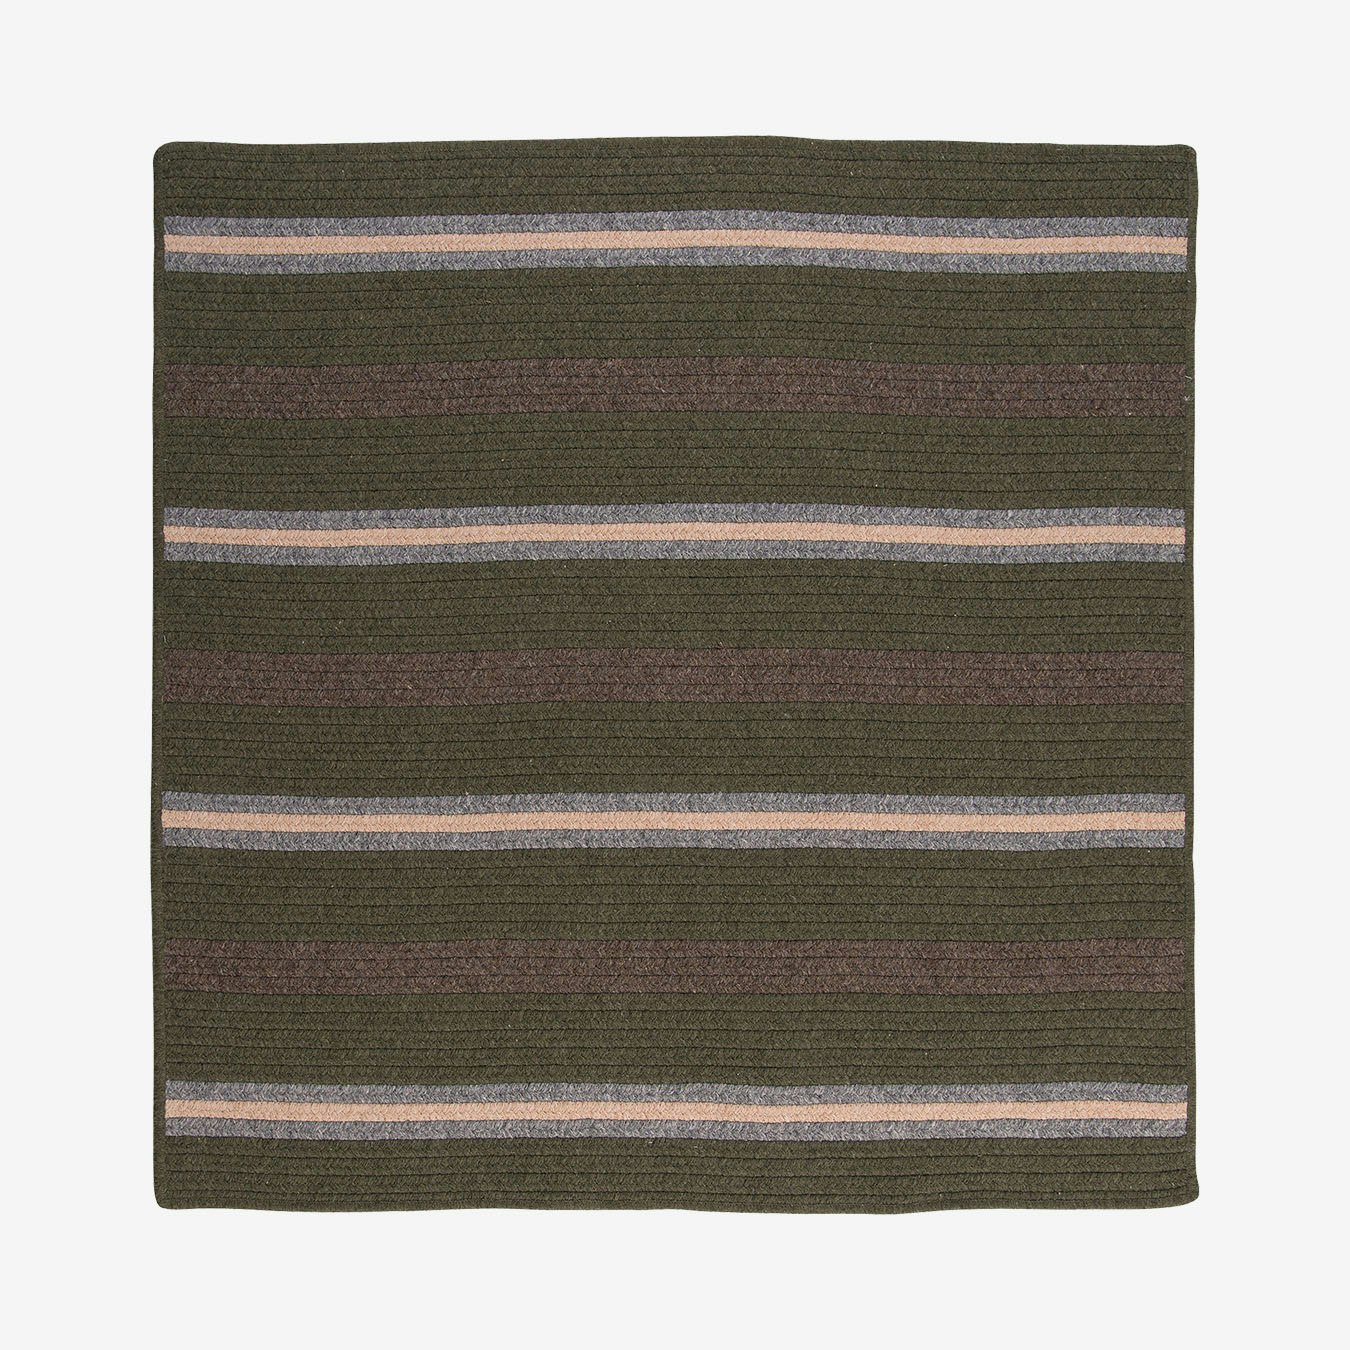 Modest square accent rugs Salisbury Square Area Rug Olive By Colonial Mills Fy